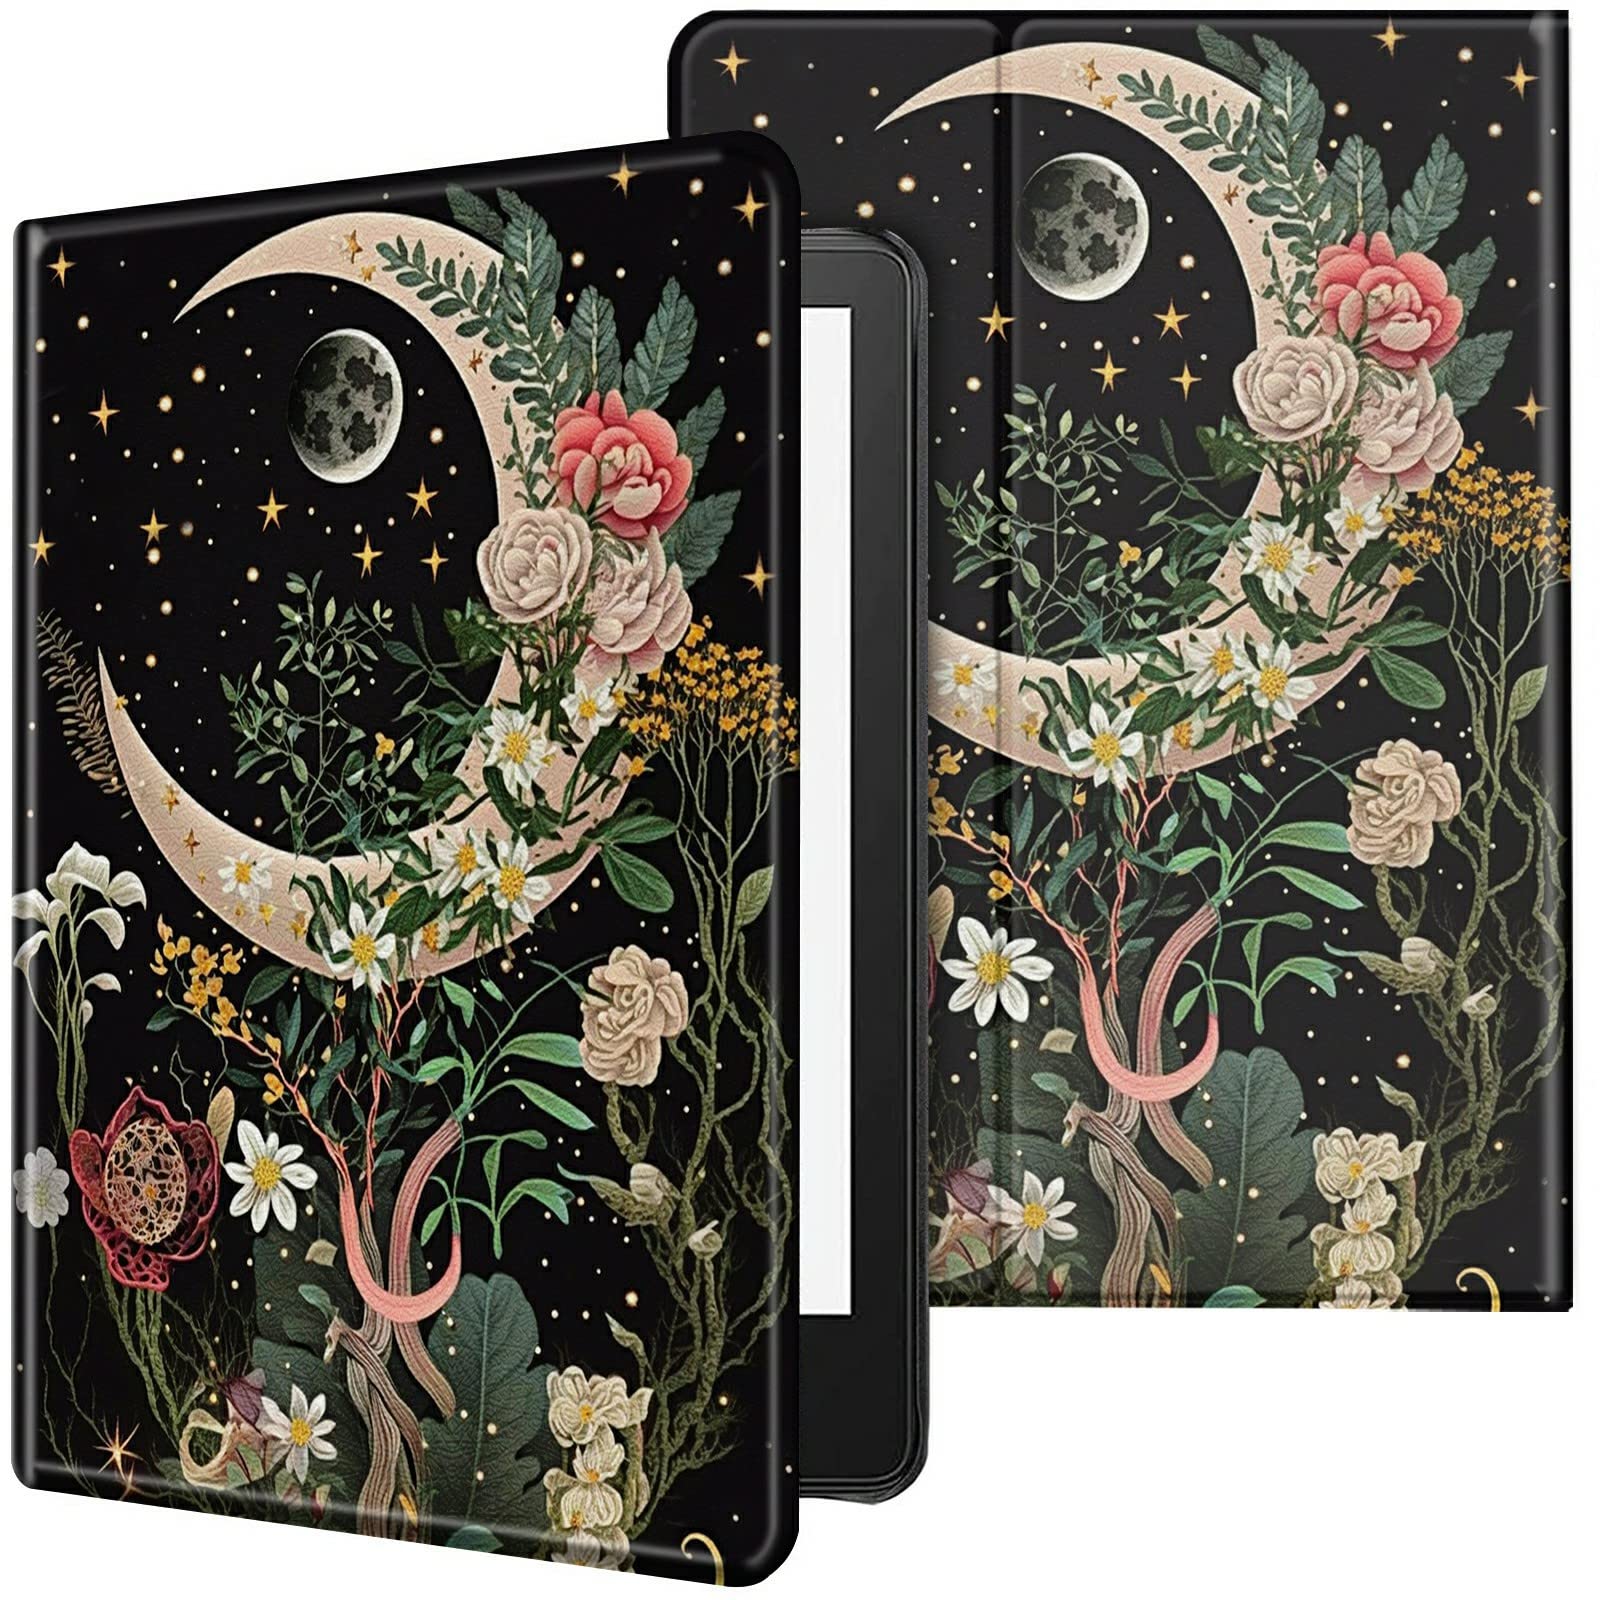 CGFGHHUY Case for All-New Kindle 11th Generation 6 inch 2022 Release Lightweight Protective PU Leather Smart Stand Cover with Auto Wake Sleep Case for Kindle 2022 11th Gen E-Reader,Moon Floral Flower